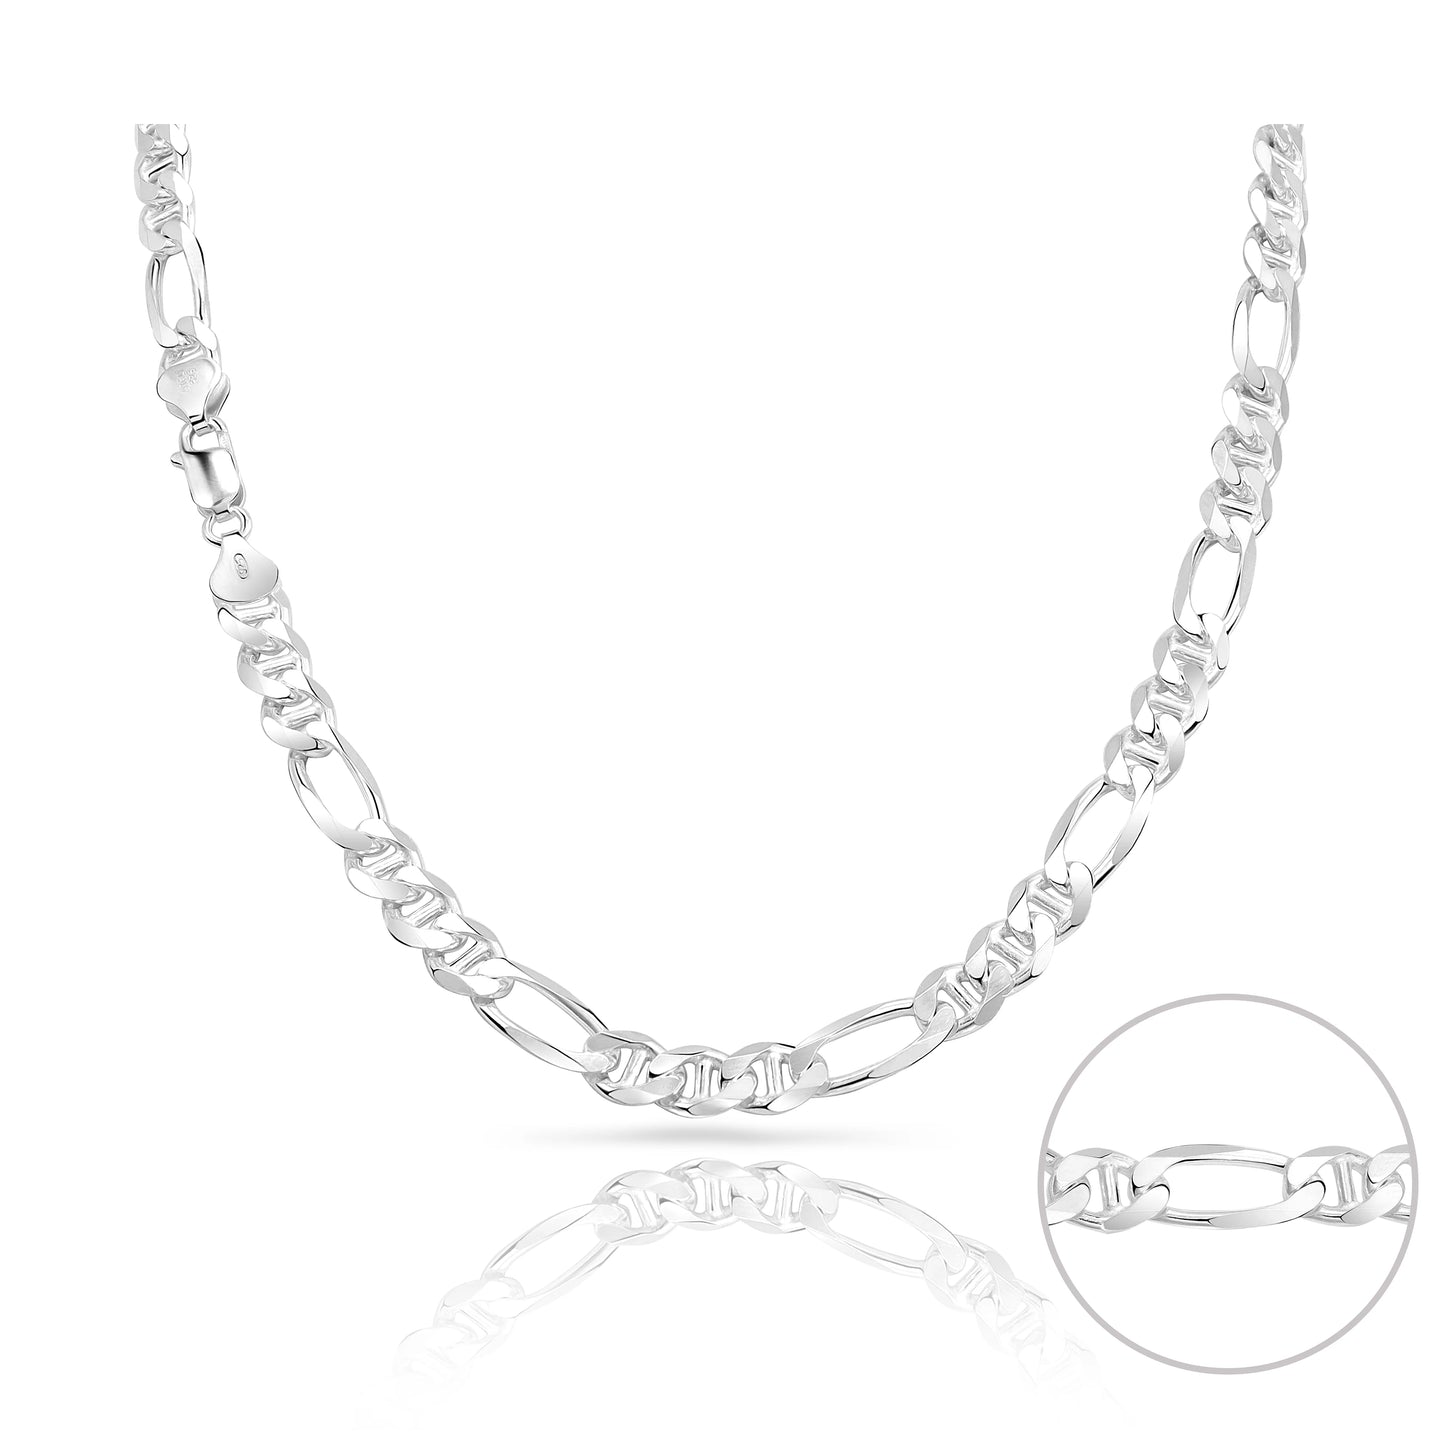 Figarucci Kette 7mm breit 55cm lang 925 Sterlingsilber Made in Italy (K607) - Taipan Schmuck